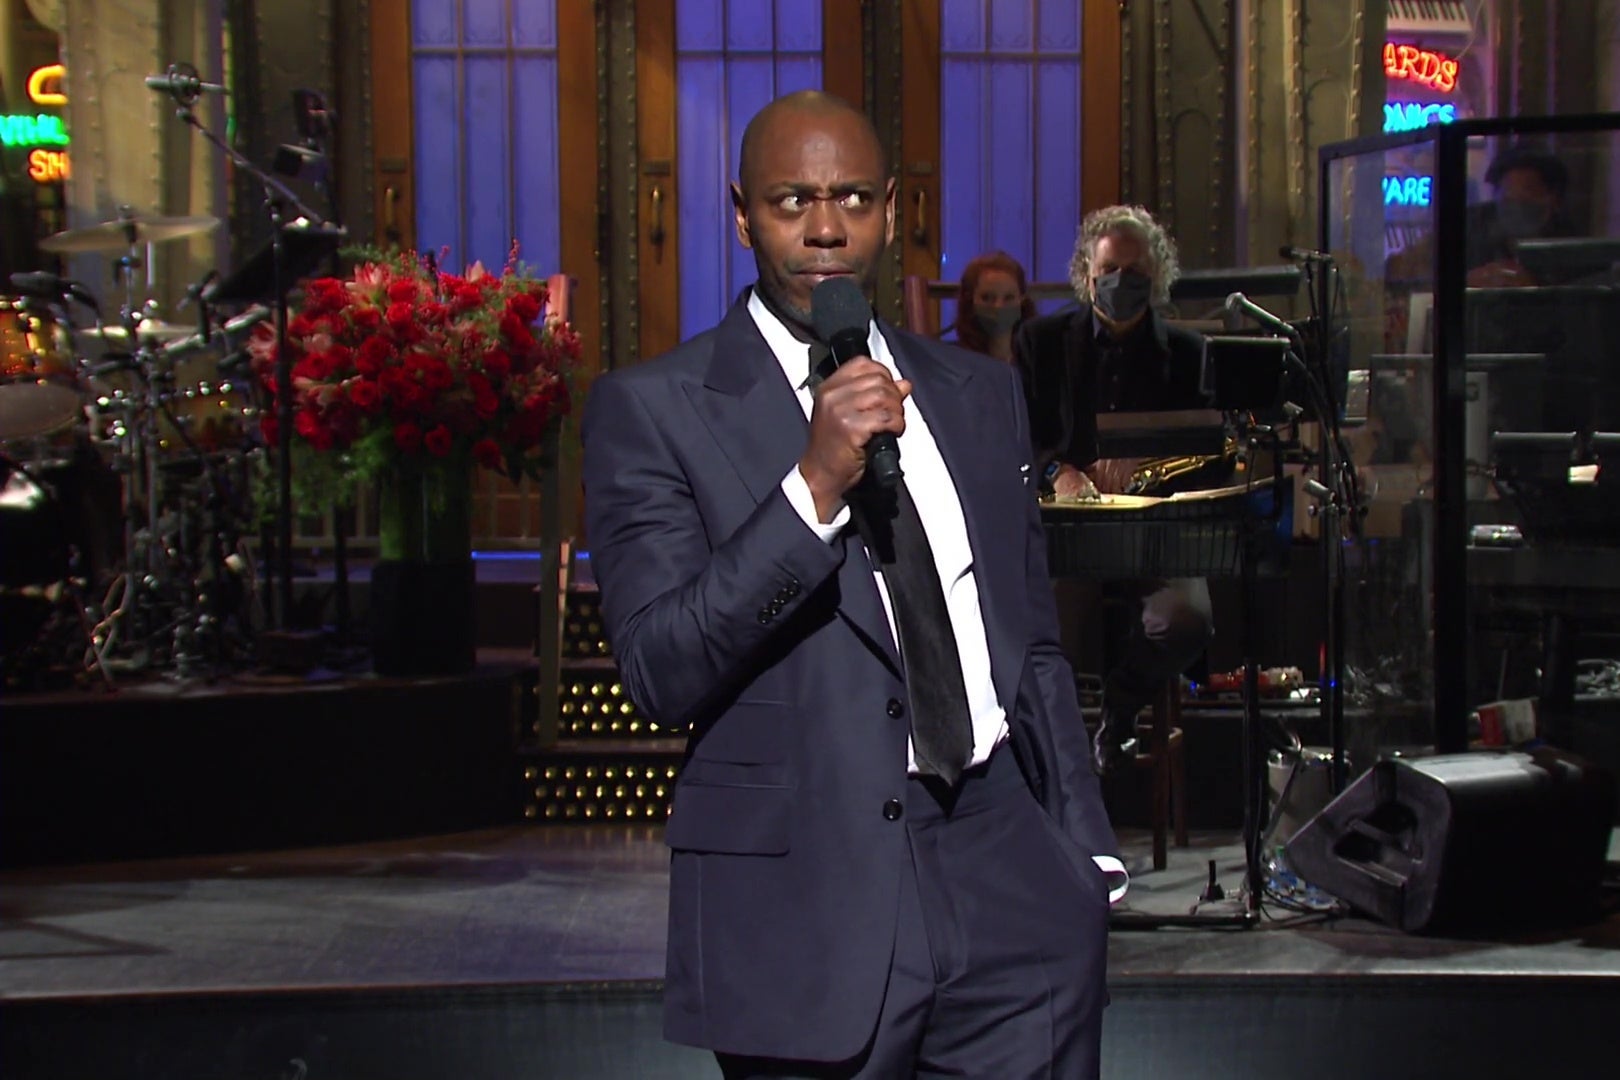 Dave Chappelle, in a blue suit, on SNL's main stage, holding a microphone.